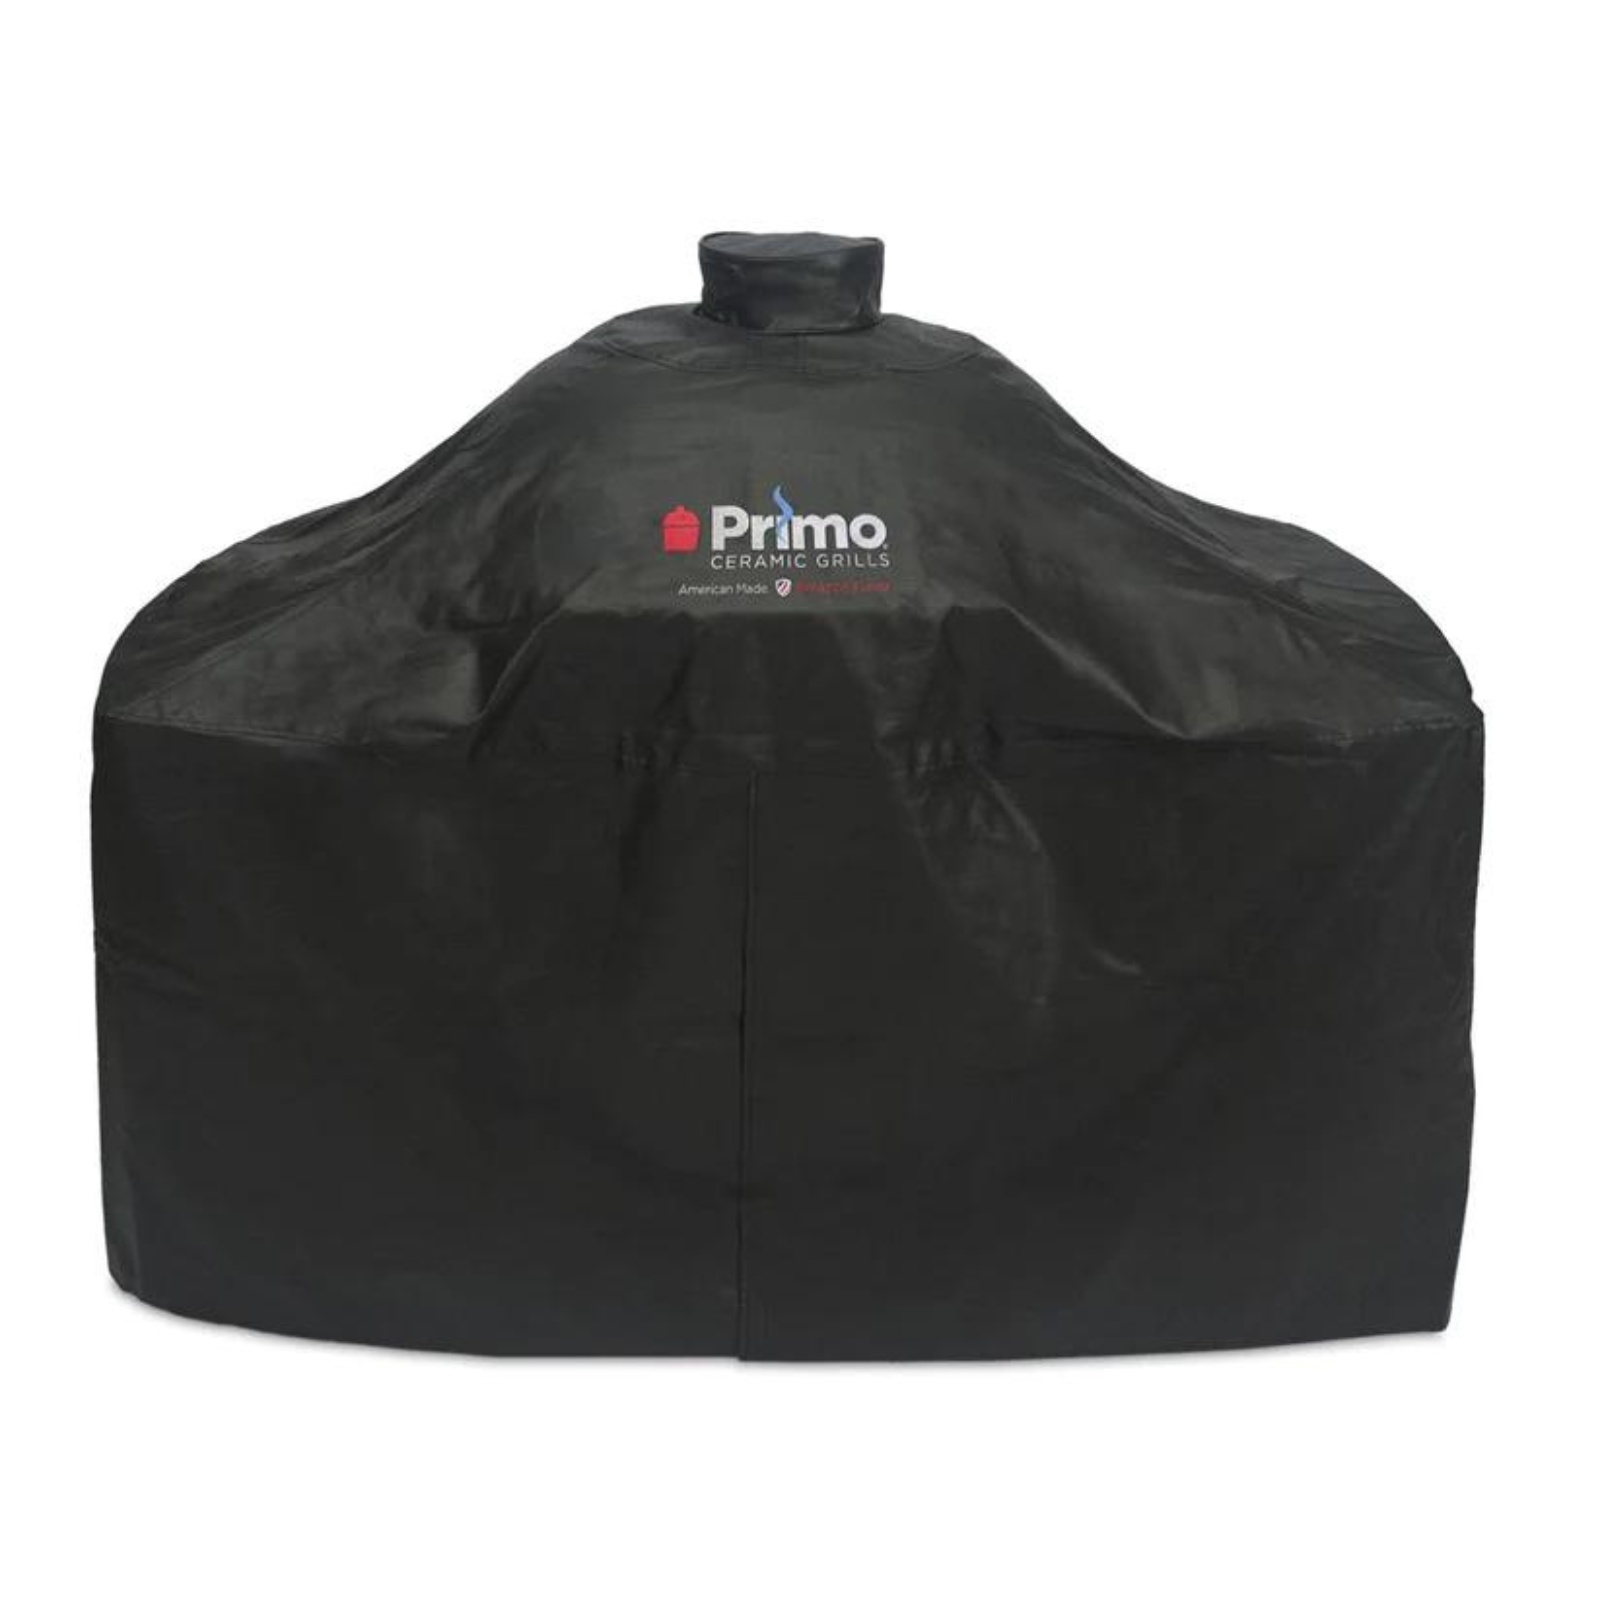 Primo Grill Cover for XL 400 carts and tables